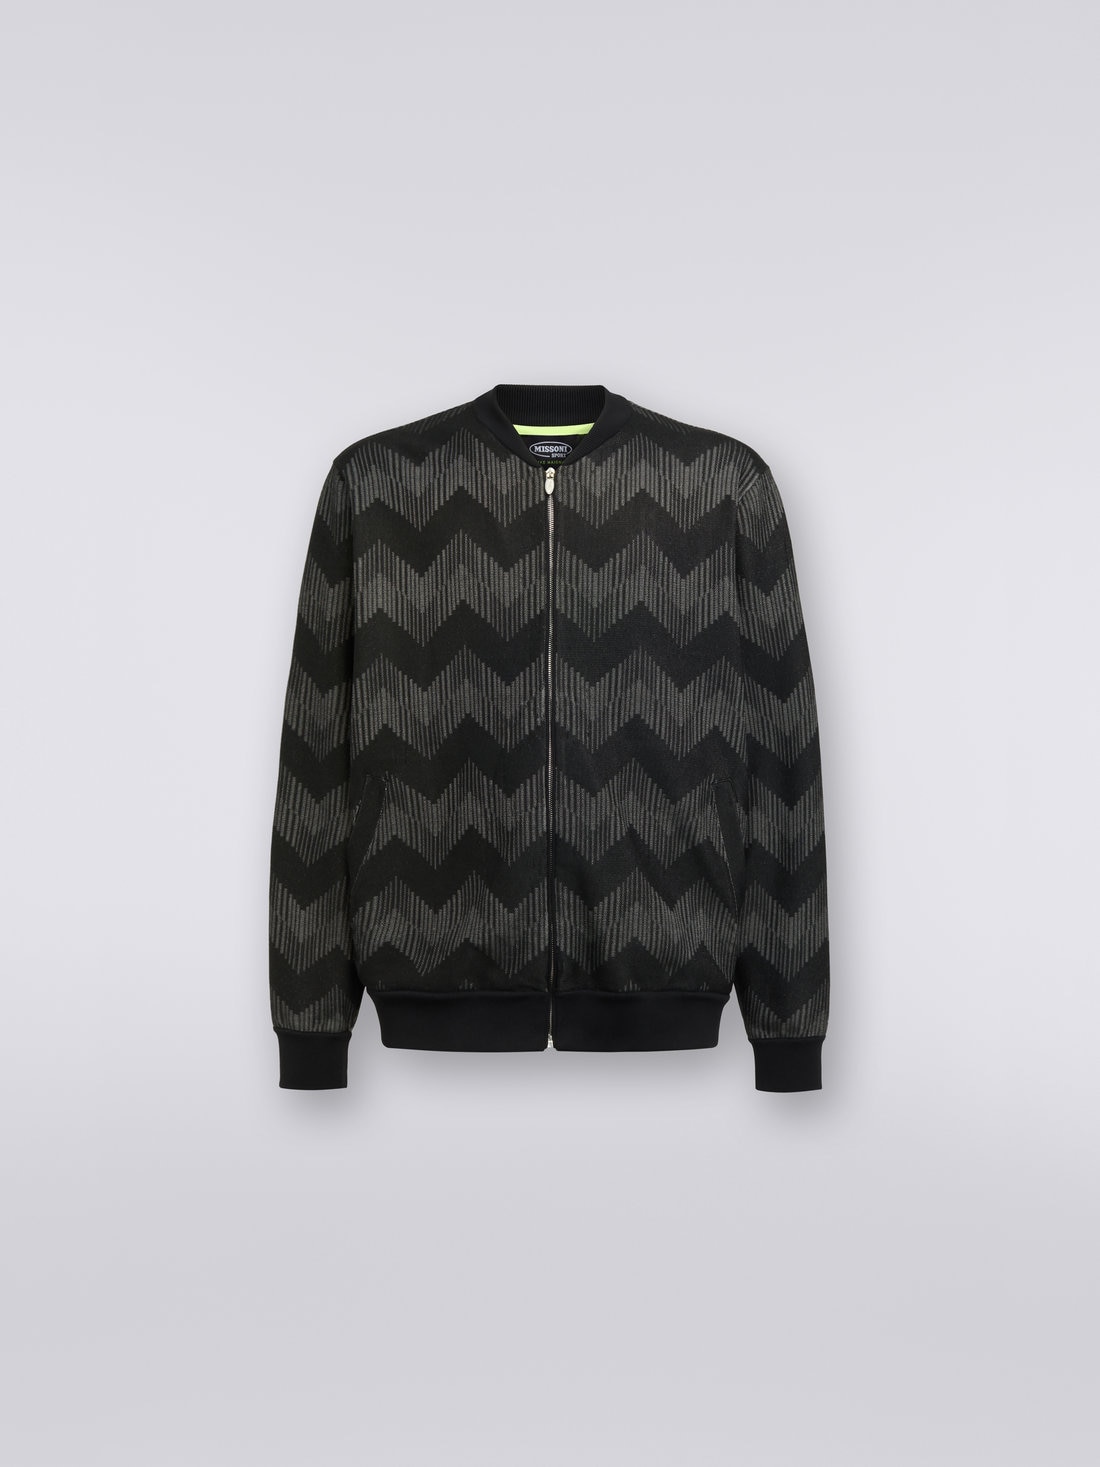 Cotton blend zigzag bomber jacket in collaboration with Mike Maignan, Black & White - TS23SC04BK031NS91IB - 0